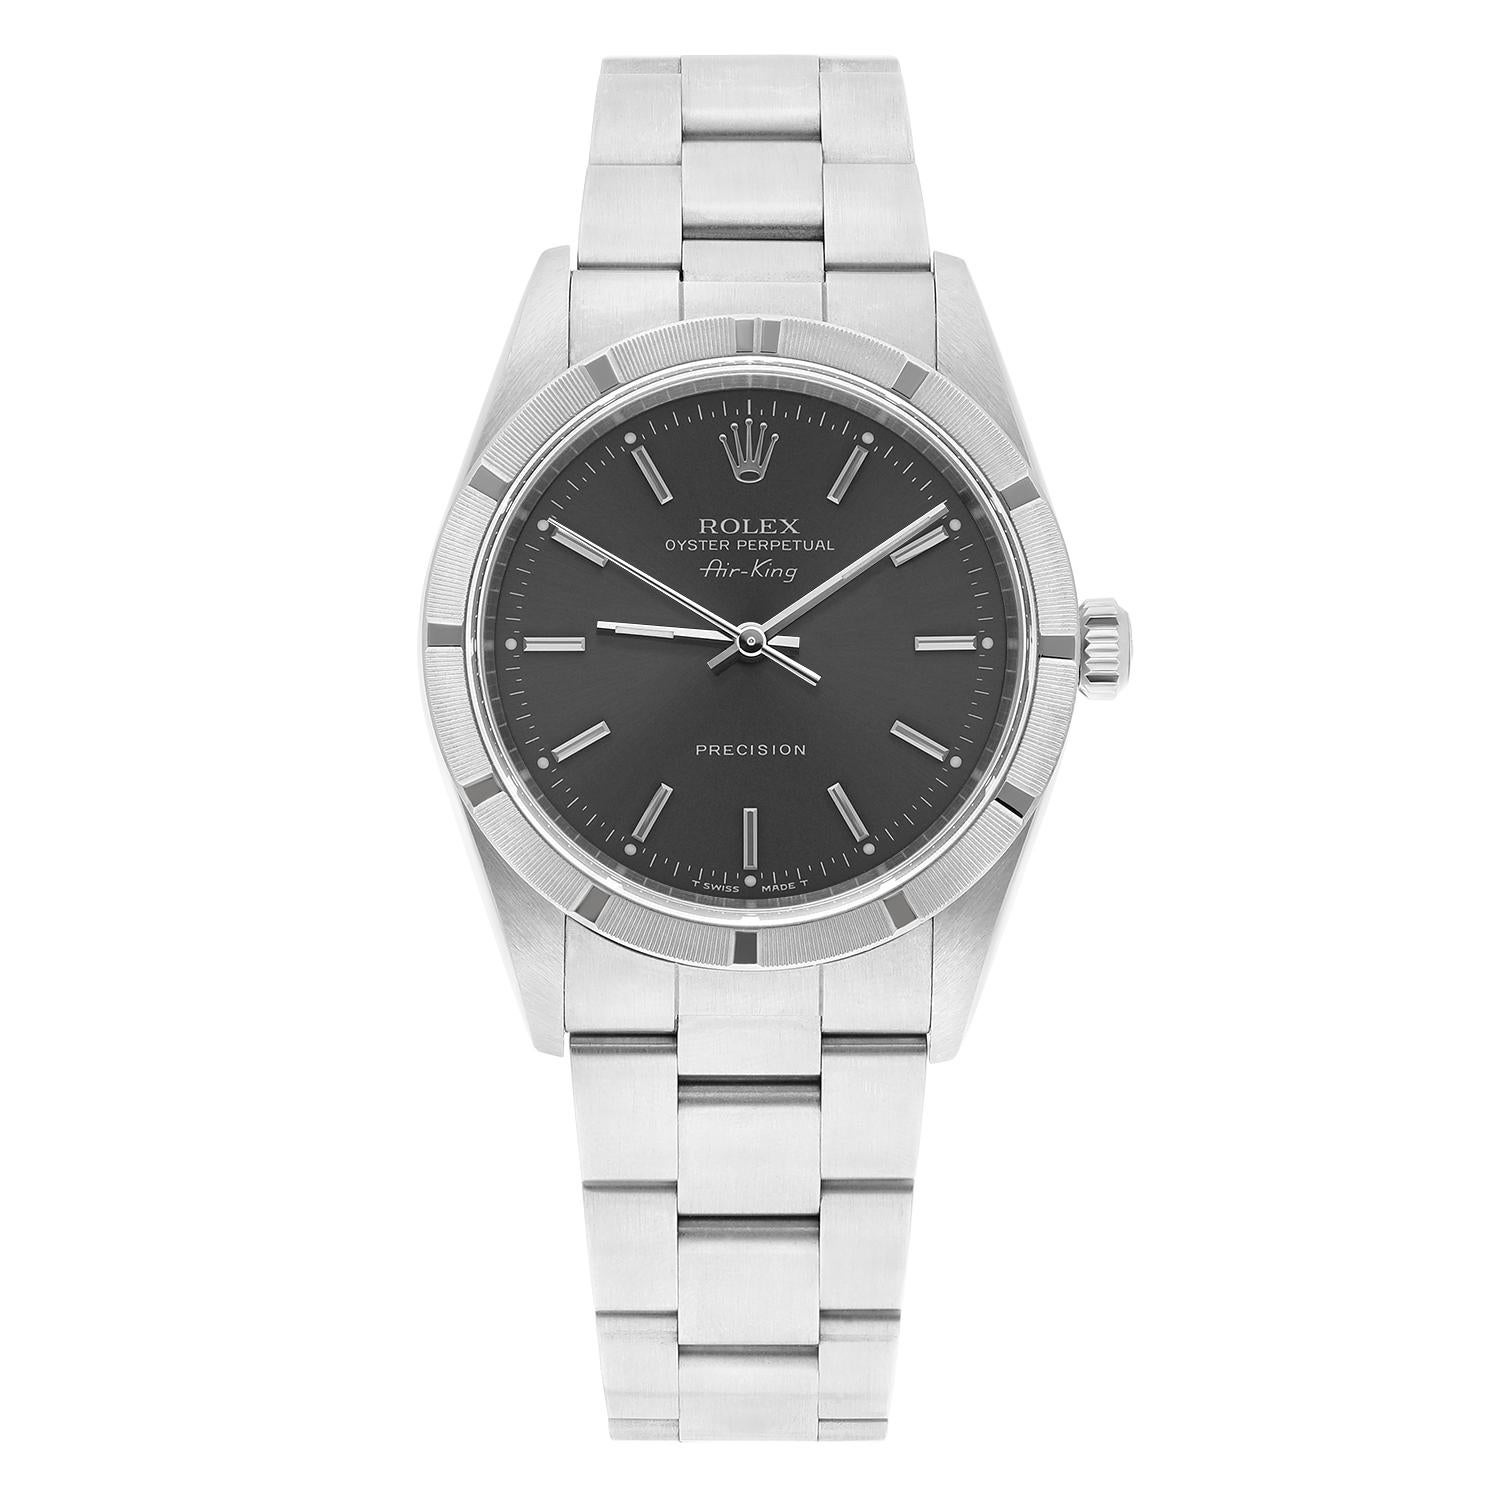 Rolex Air-King 34mm Grey Dial Stainless Steel Oyster Watch 14010 Circa 1991

This watch has been professionally polished, serviced and is in excellent overall condition. There are absolutely no visible scratches or blemishes. Authenticity